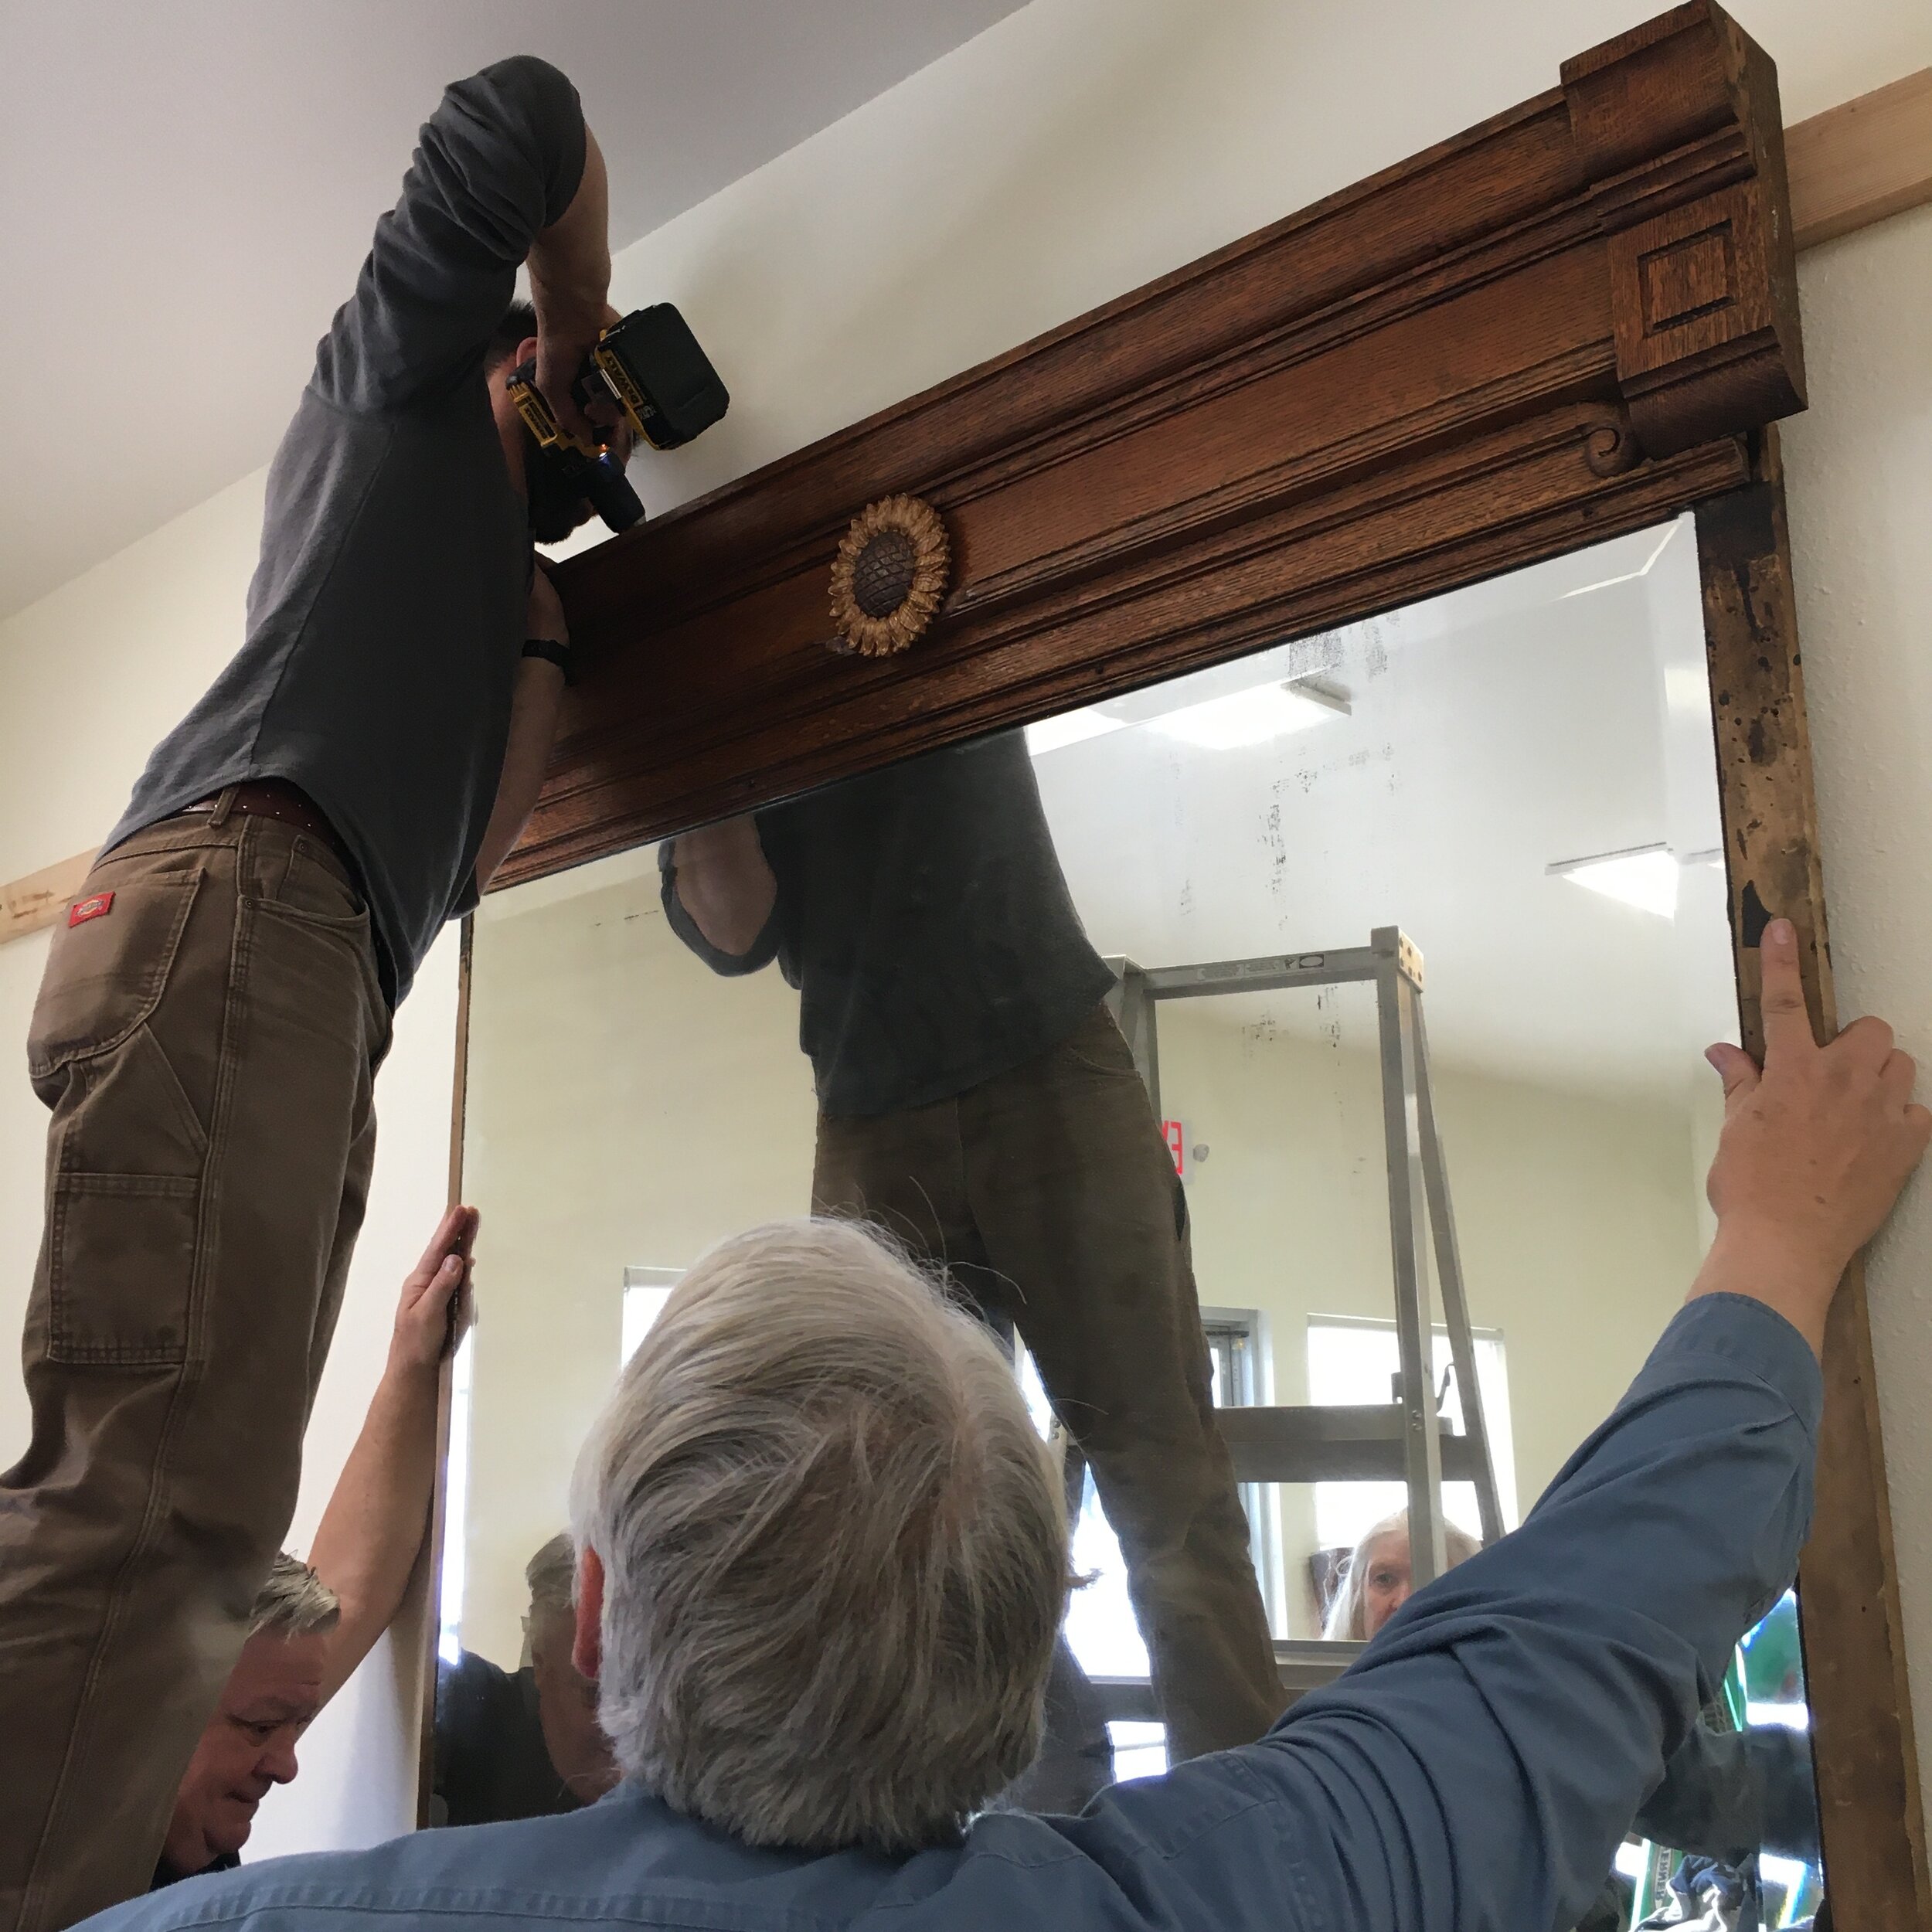 Hanging the mirror from Sweetgrass Bakery